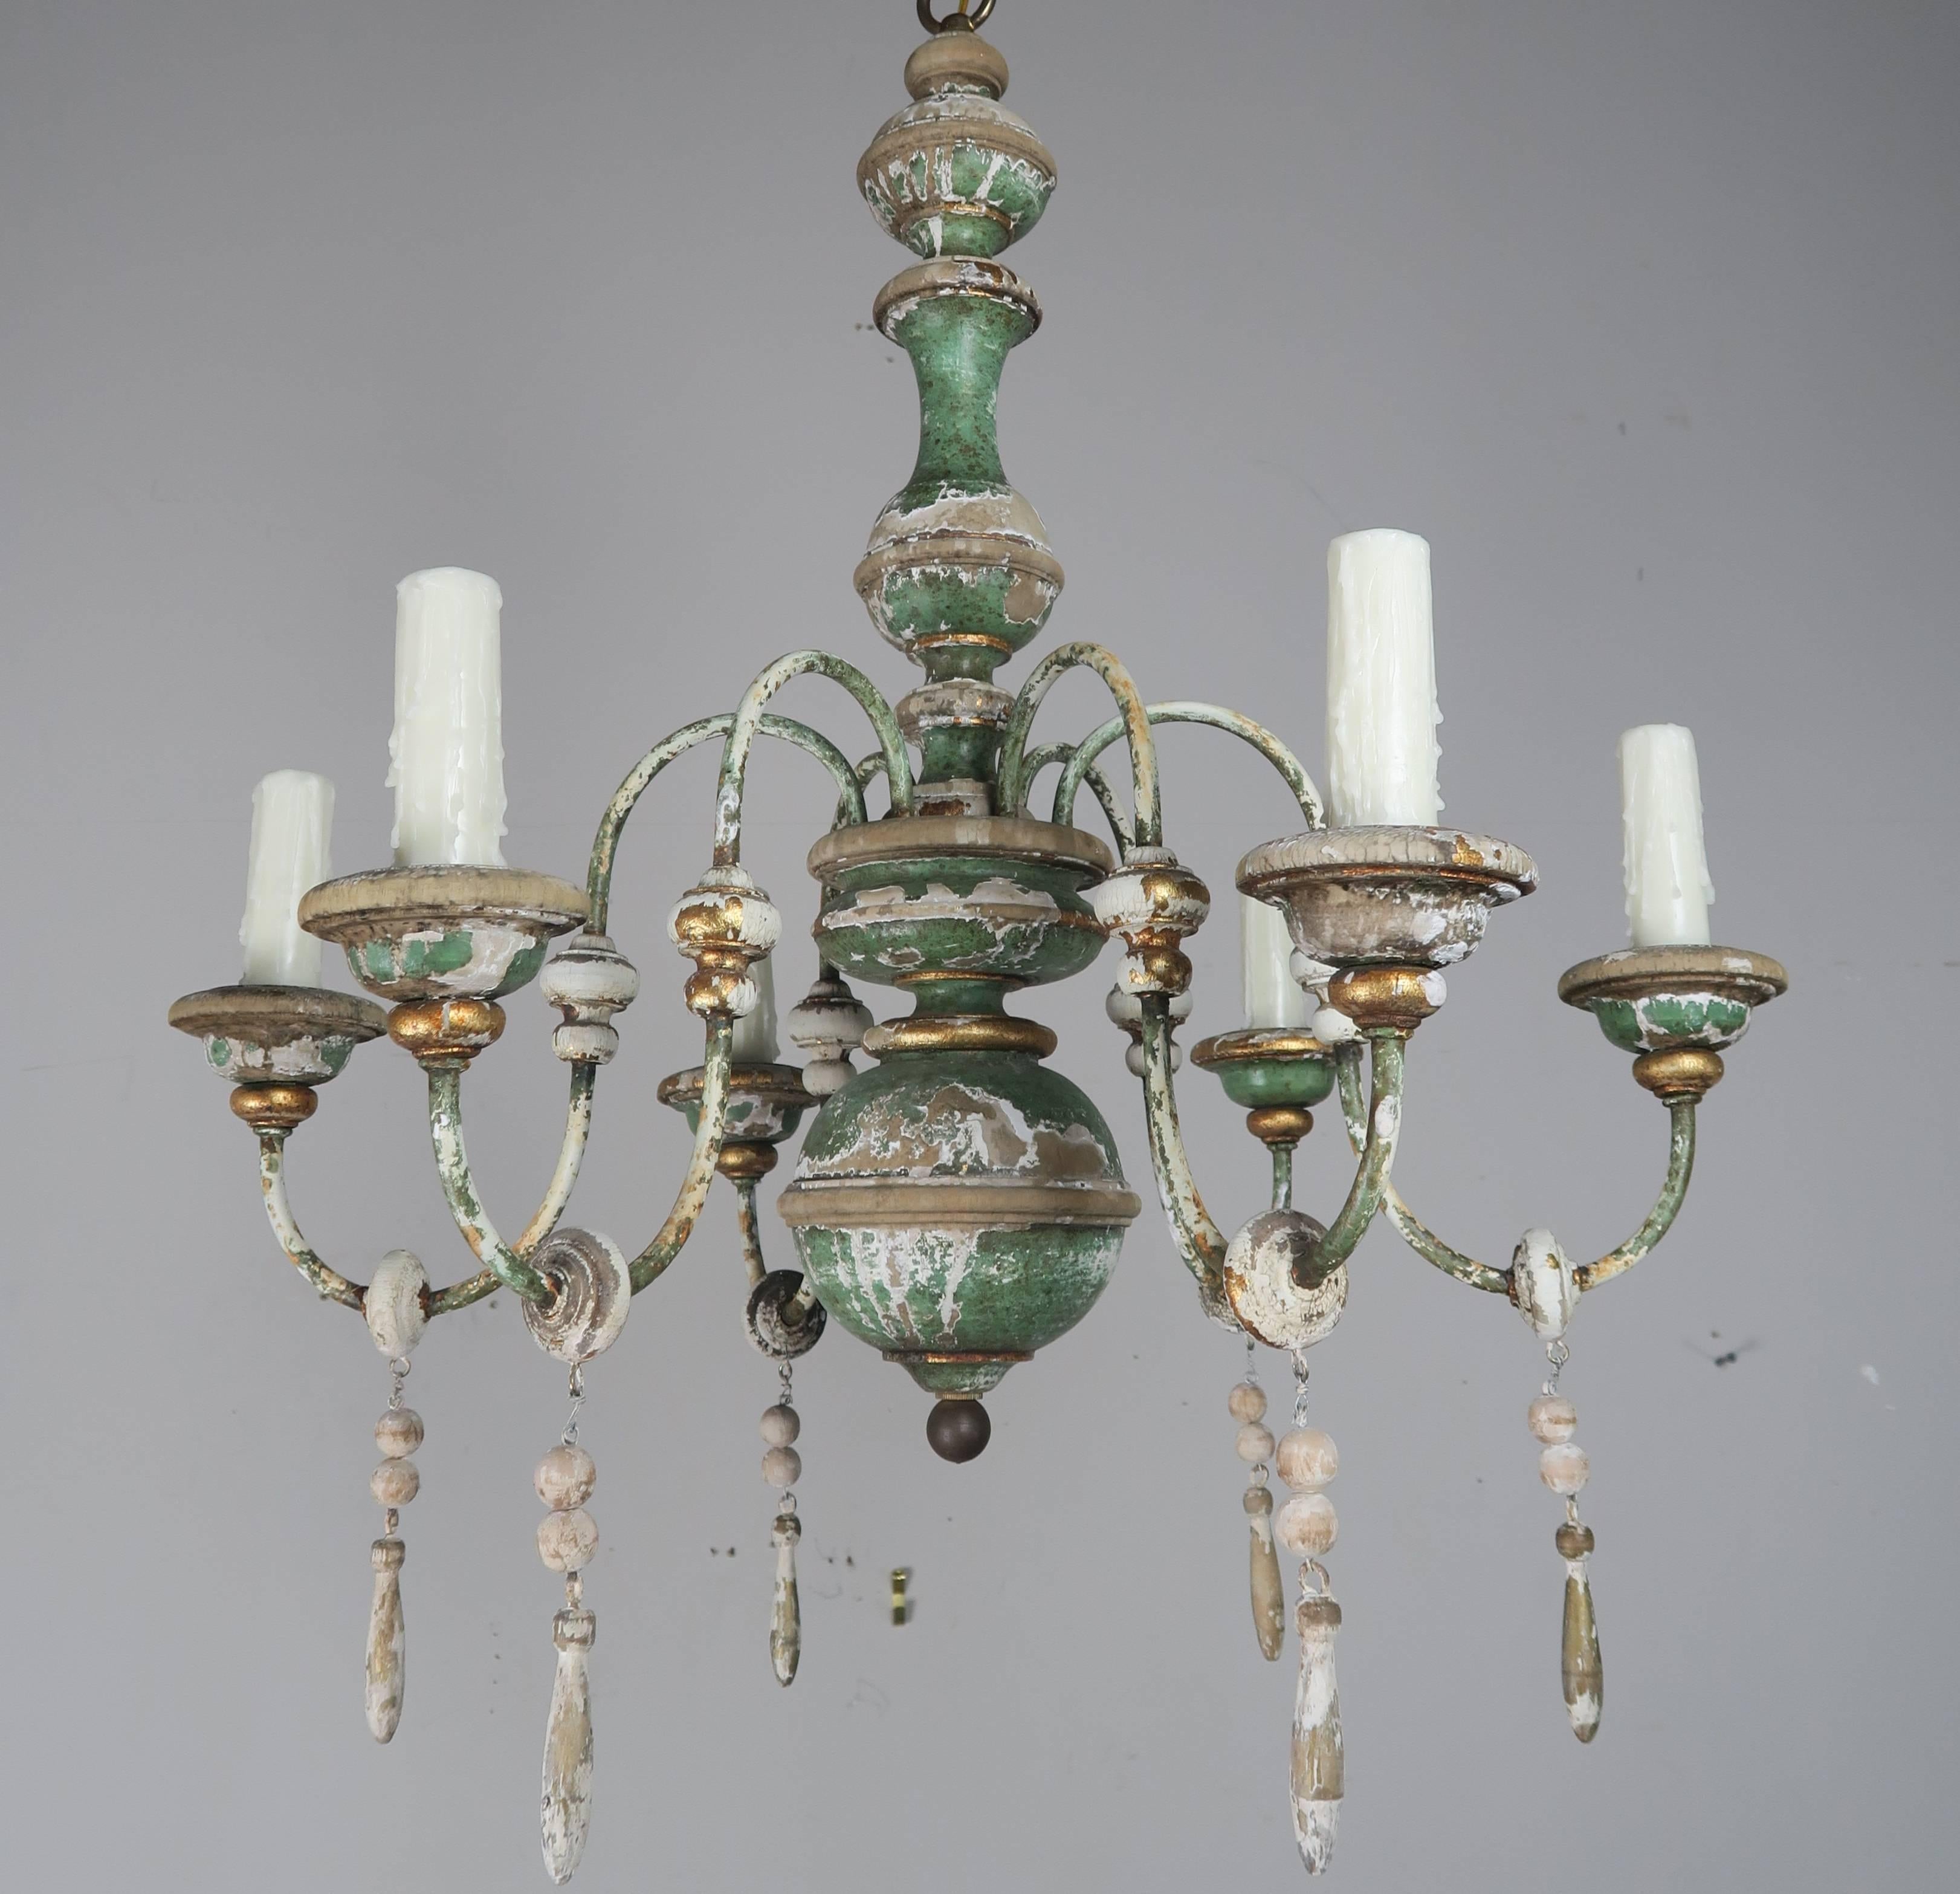 Six-light Italian painted and parcel-gilt chandelier with wood tassel drops. The fixture has been newly rewired with drip wax candle covers. Includes 36